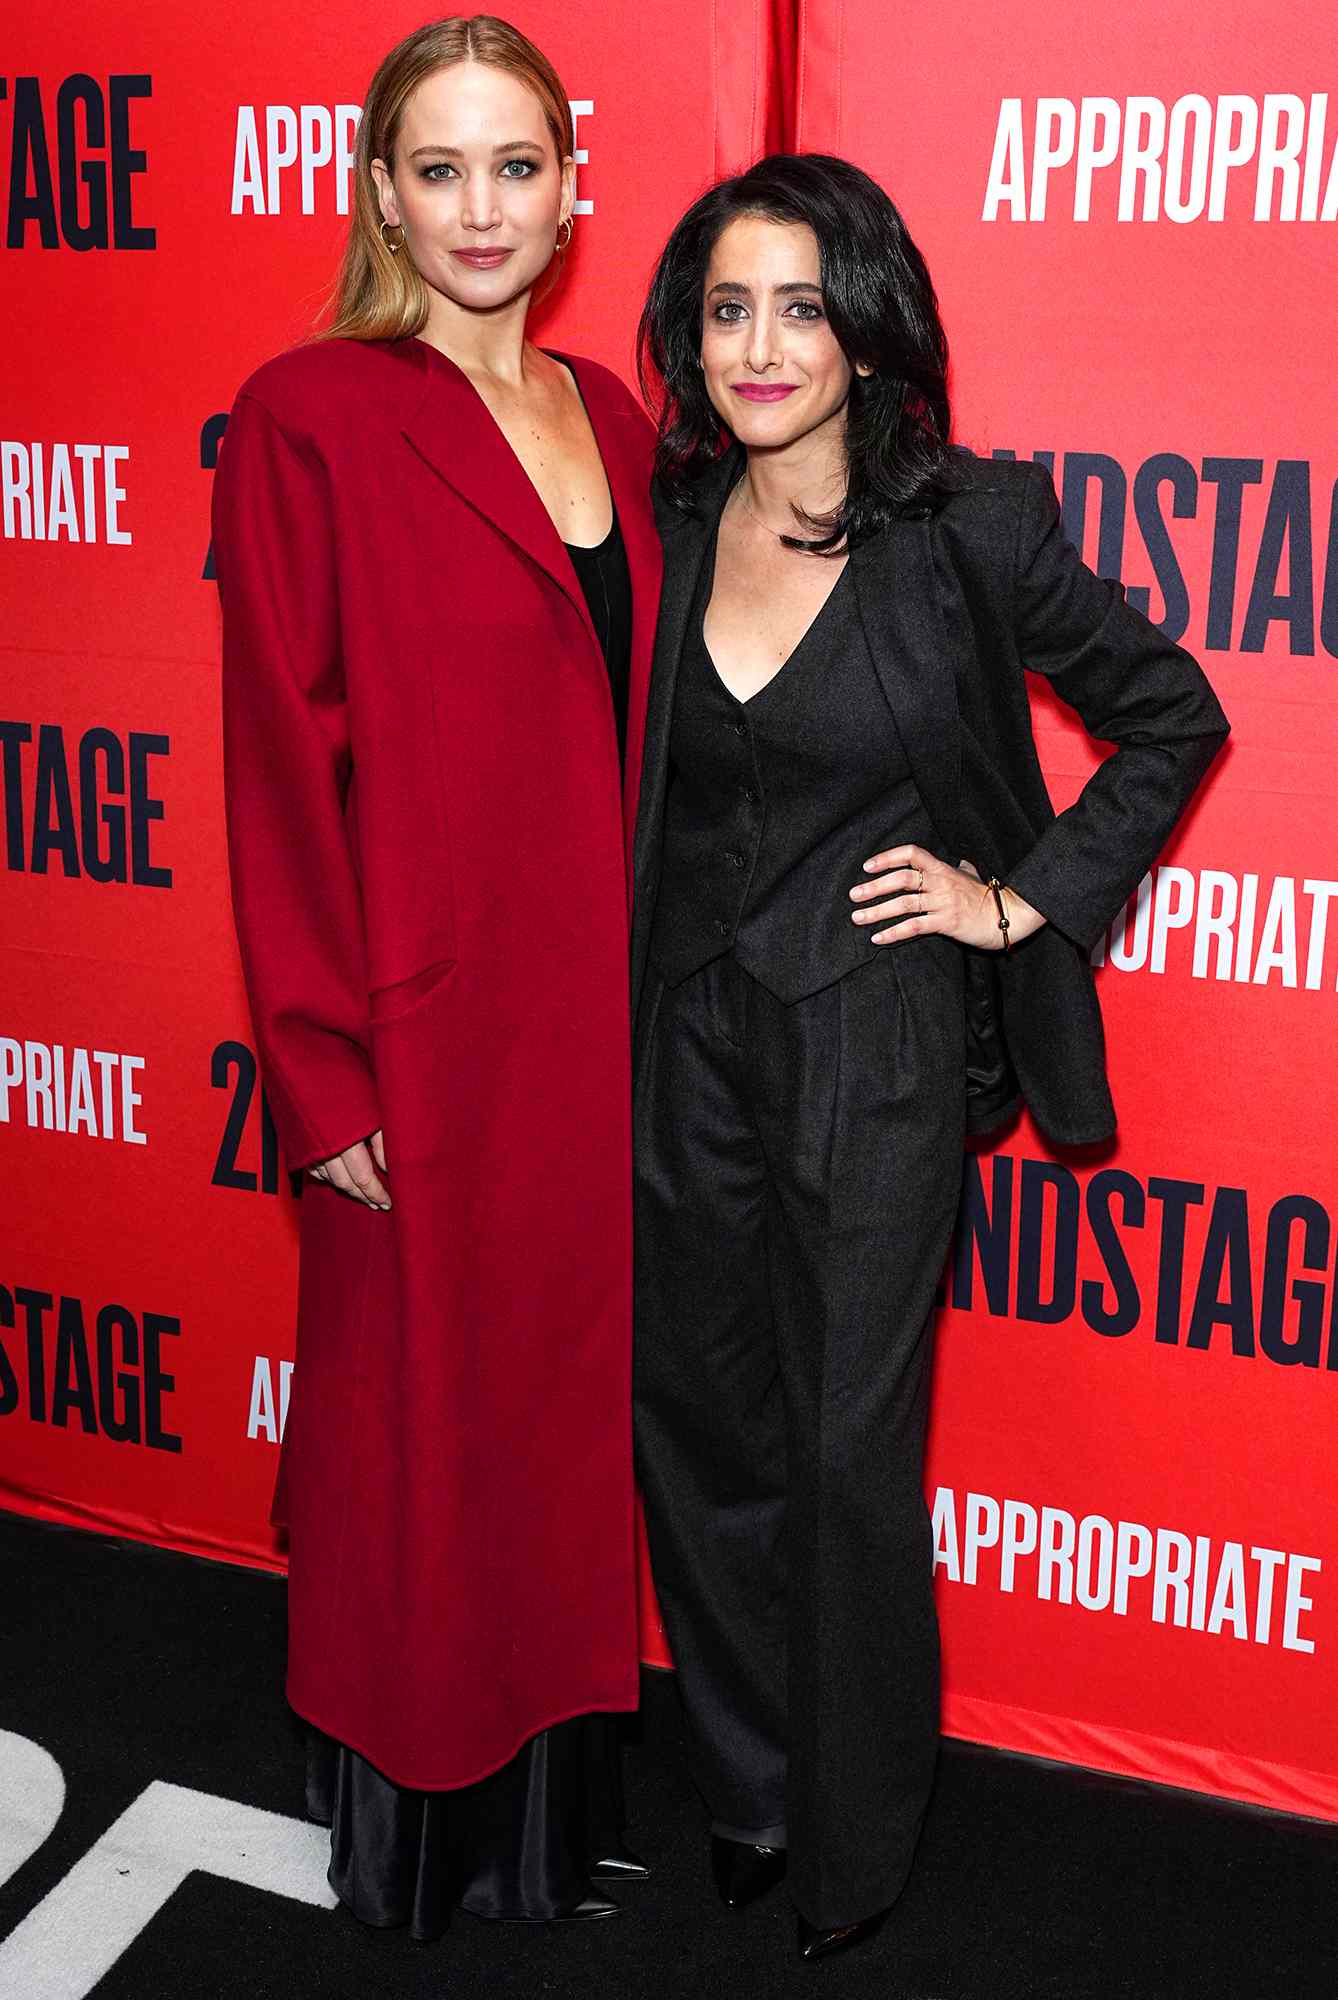  Jennifer Lawrence poses at the opening night of the Second Stage Theater play "Appropriate" 